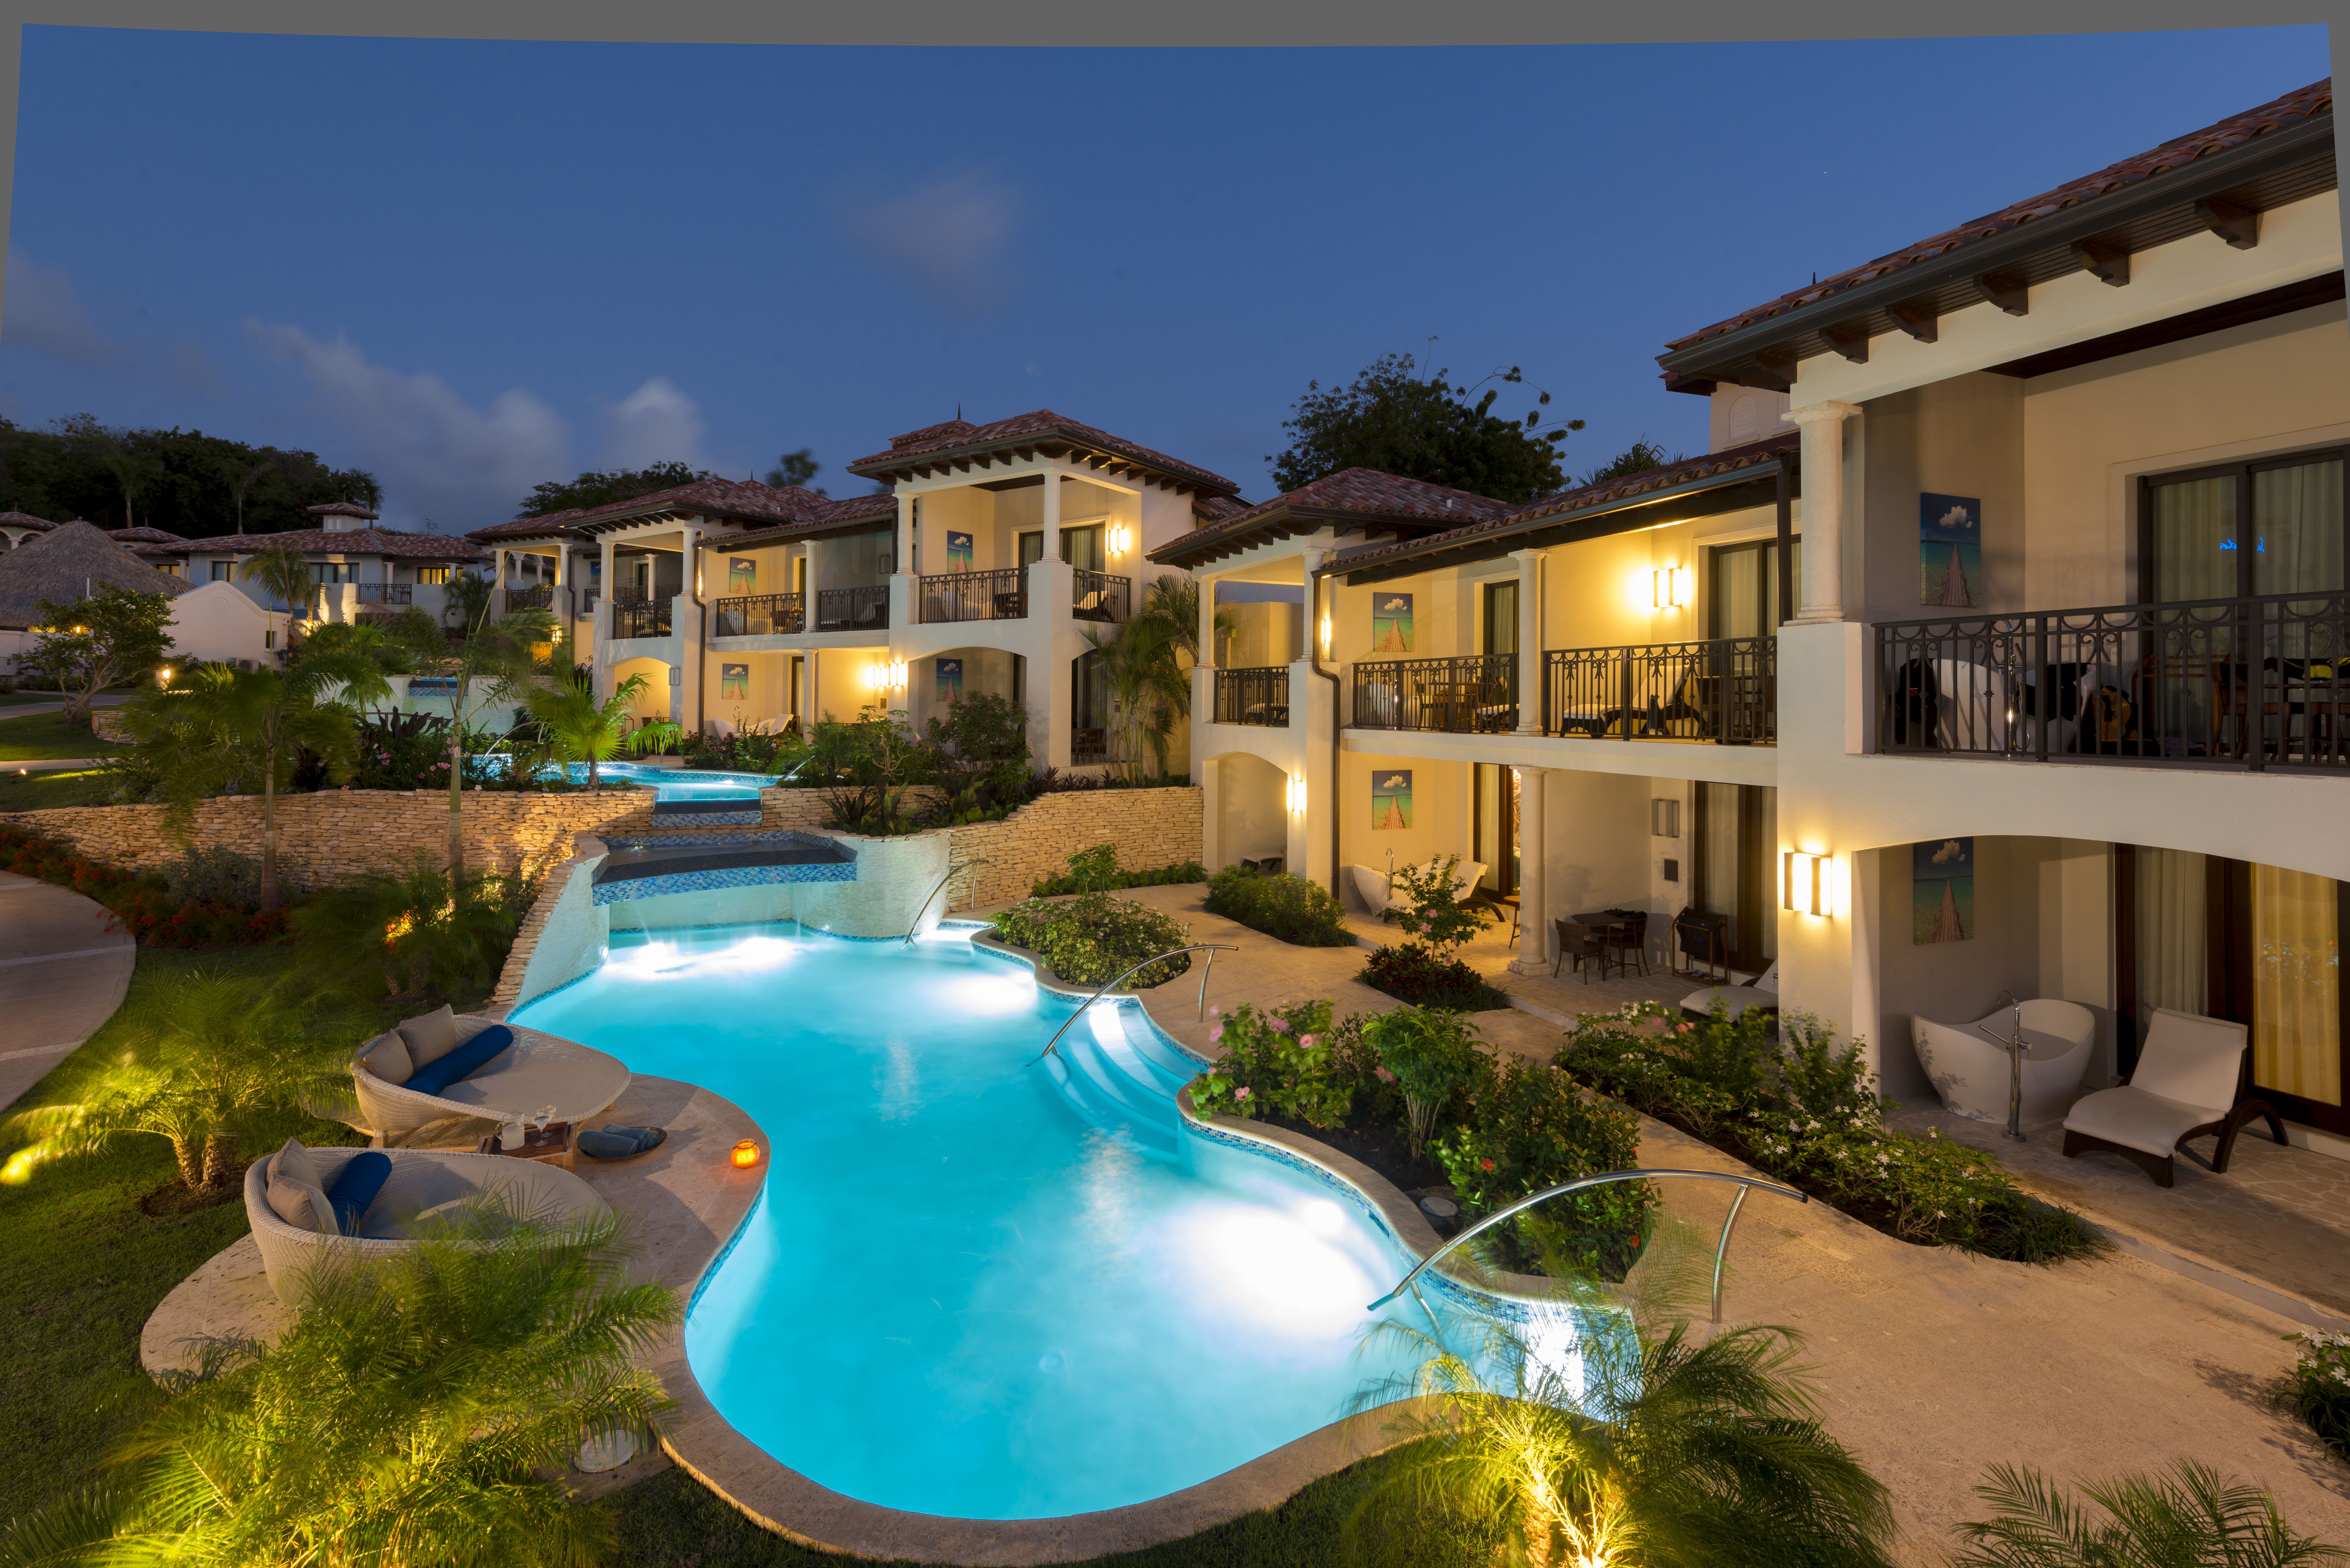 A Review of the Sandals LaSource Resor in Grenada